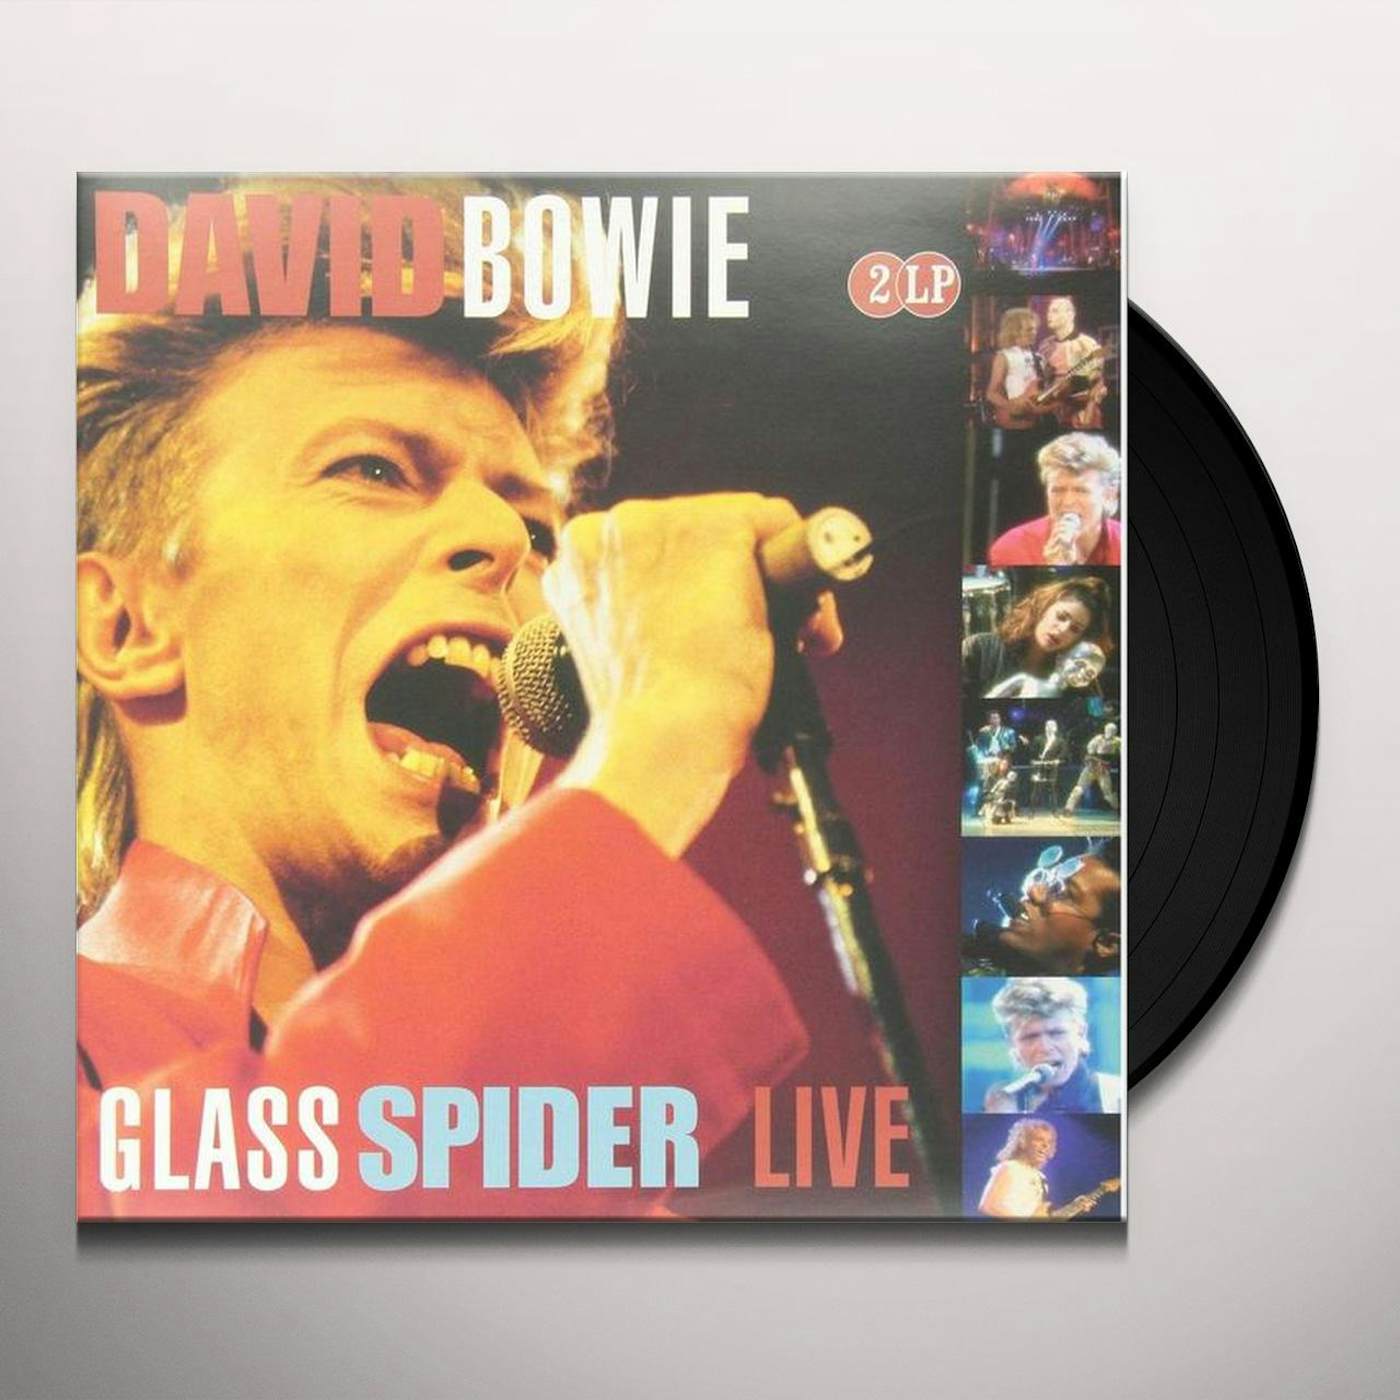 David Bowie GLASS SPIDER LIVE Vinyl Record - Holland Release